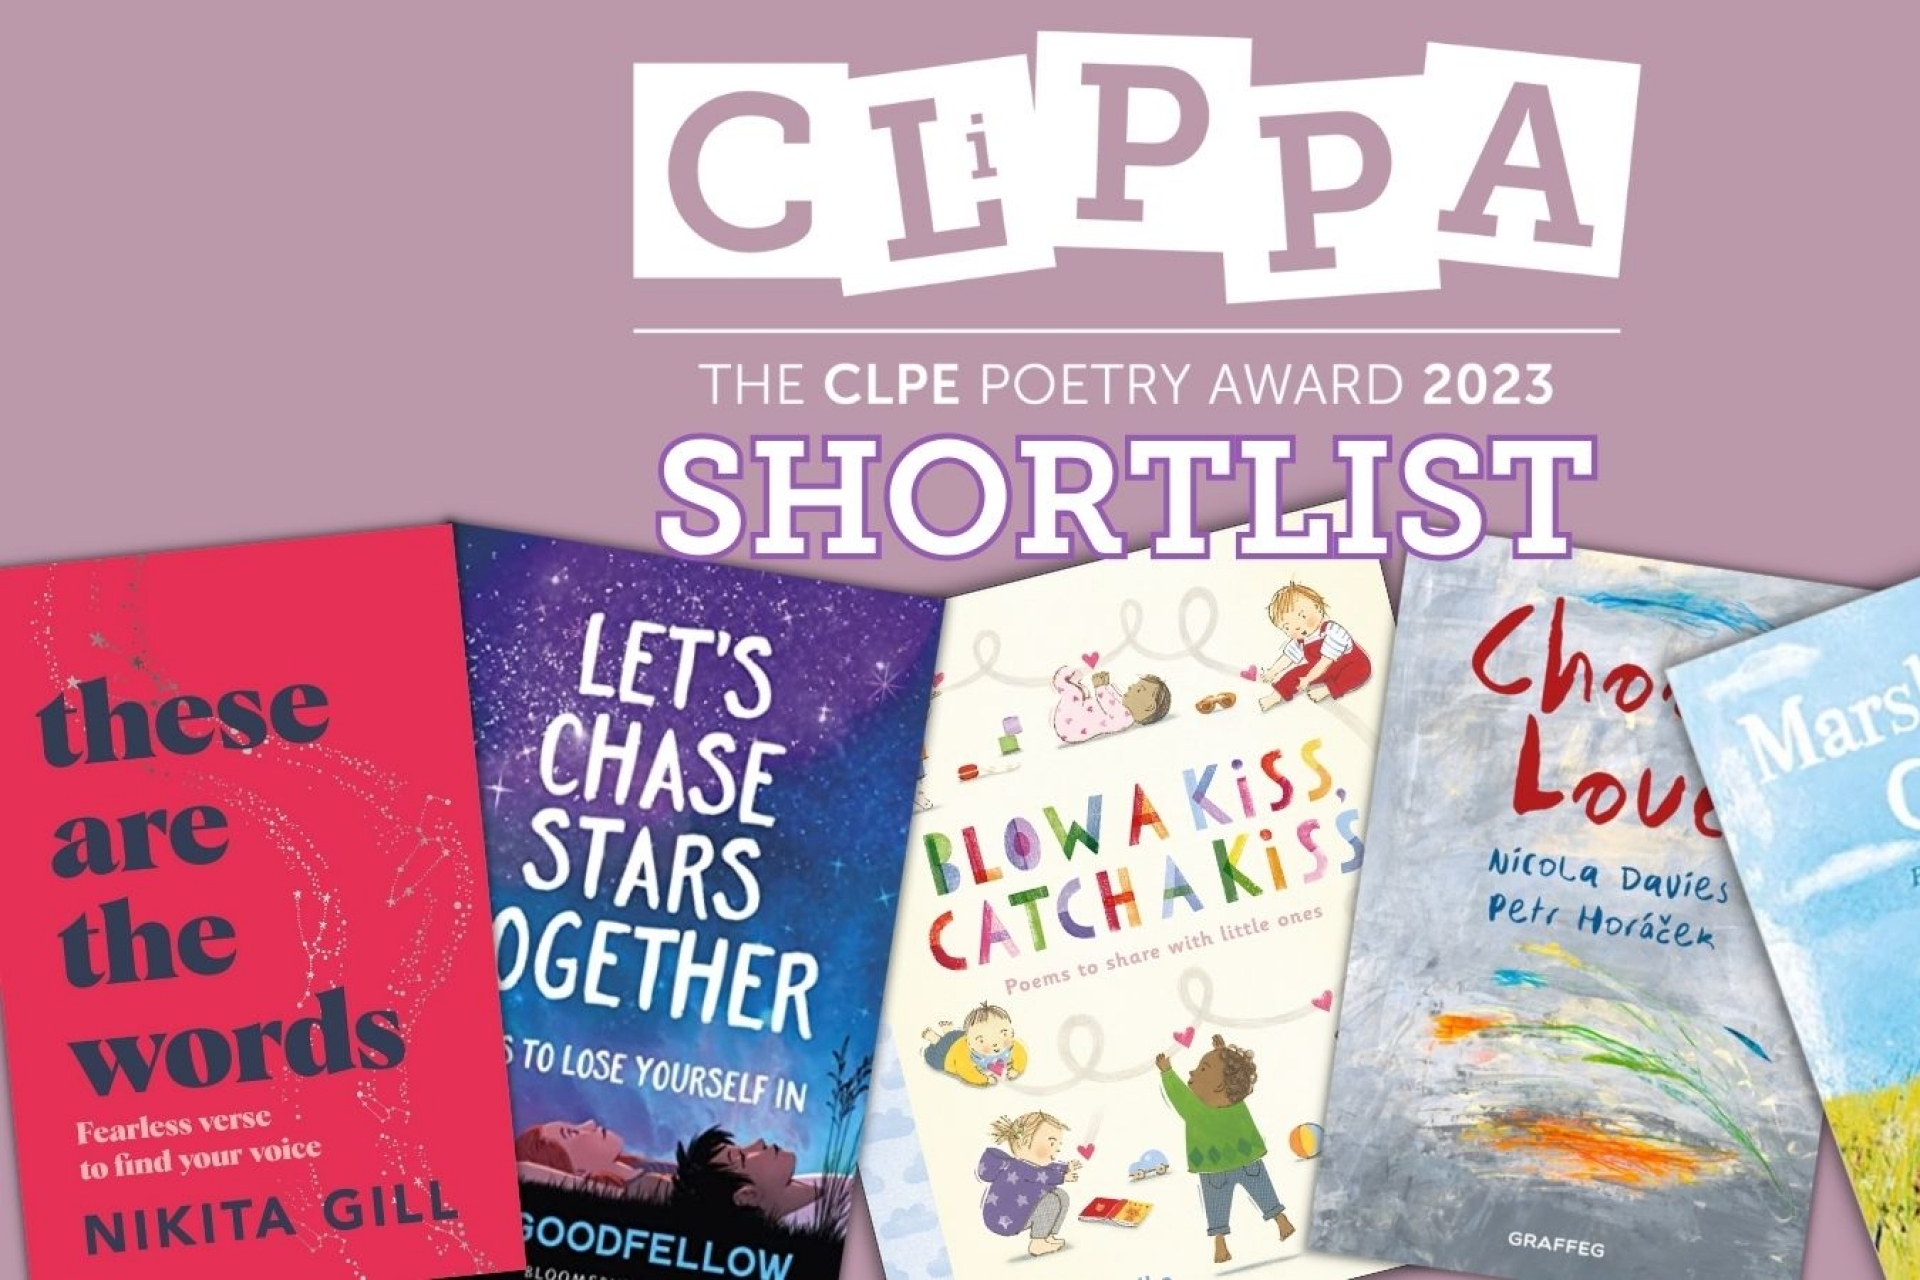 In its 20th year, the shortlist for CLiPPA (CLPE Children’s Poetry Award) reflects the wealth of talent in children’s poetry